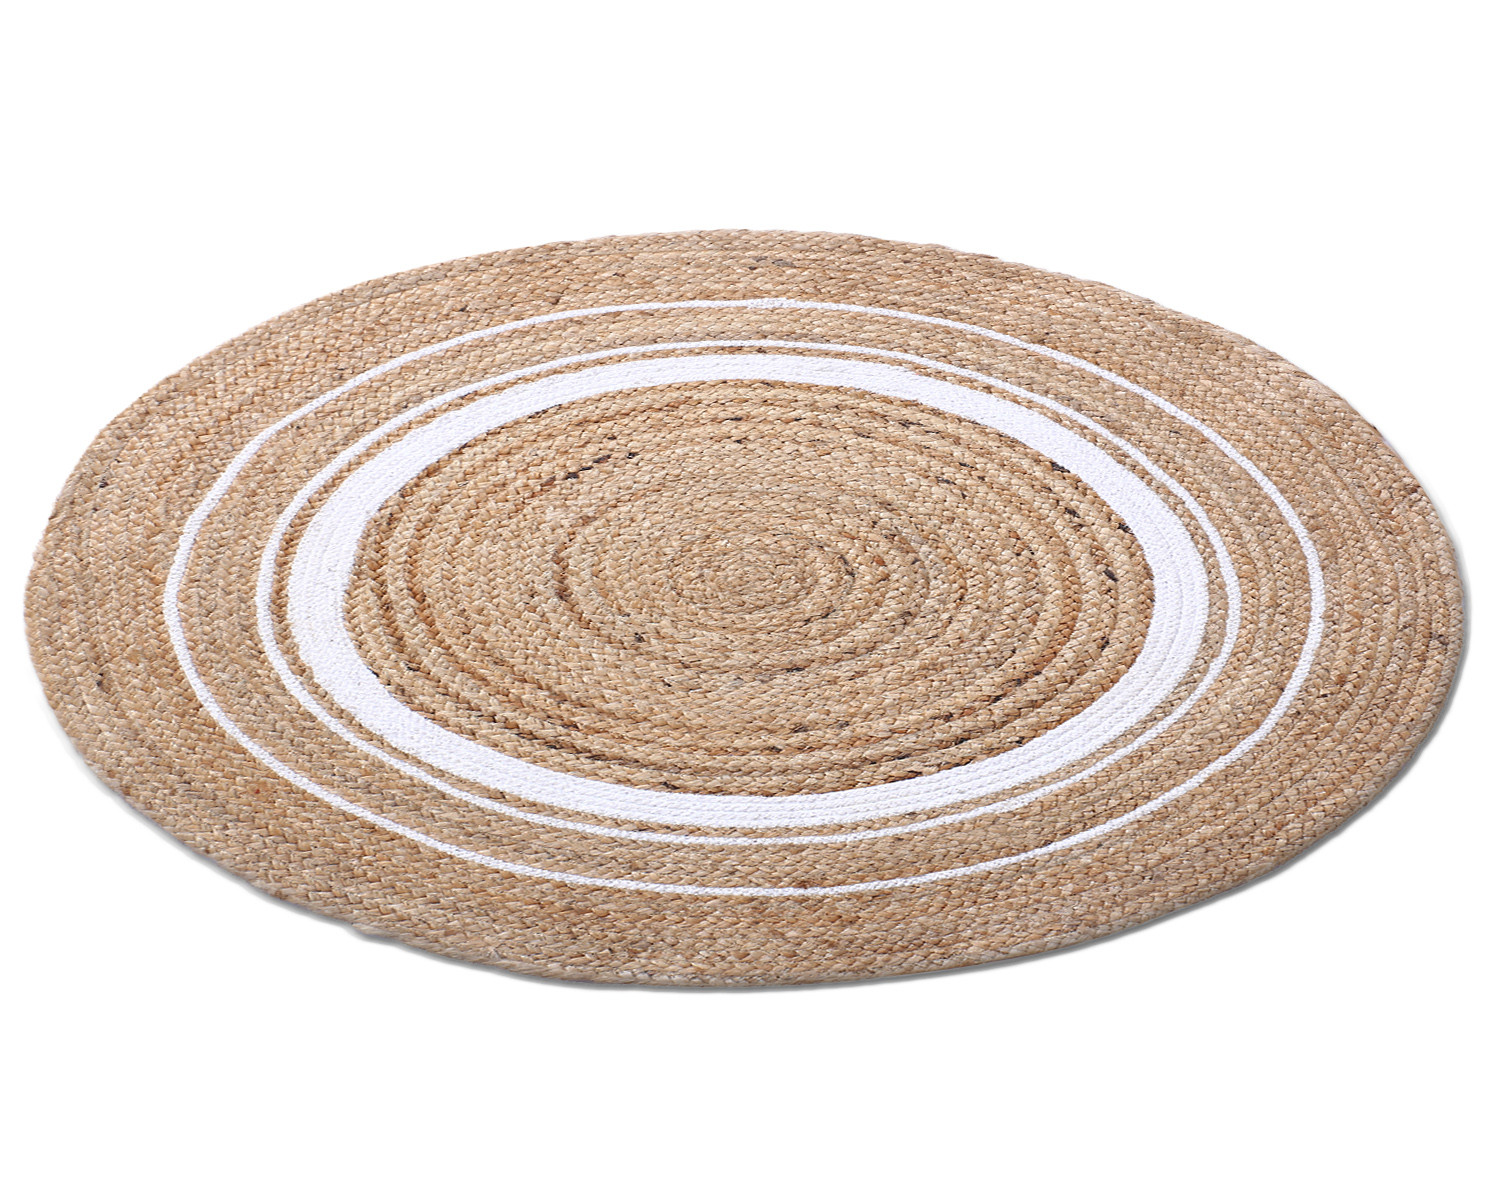 Kuber Industries Hand Woven Braided Carpet Rugs|Round Traditional Spiral Design Jute Door mat|Mat For Bedroom,Living Room,Dining Room,Yoga,60x60 cm,(White)